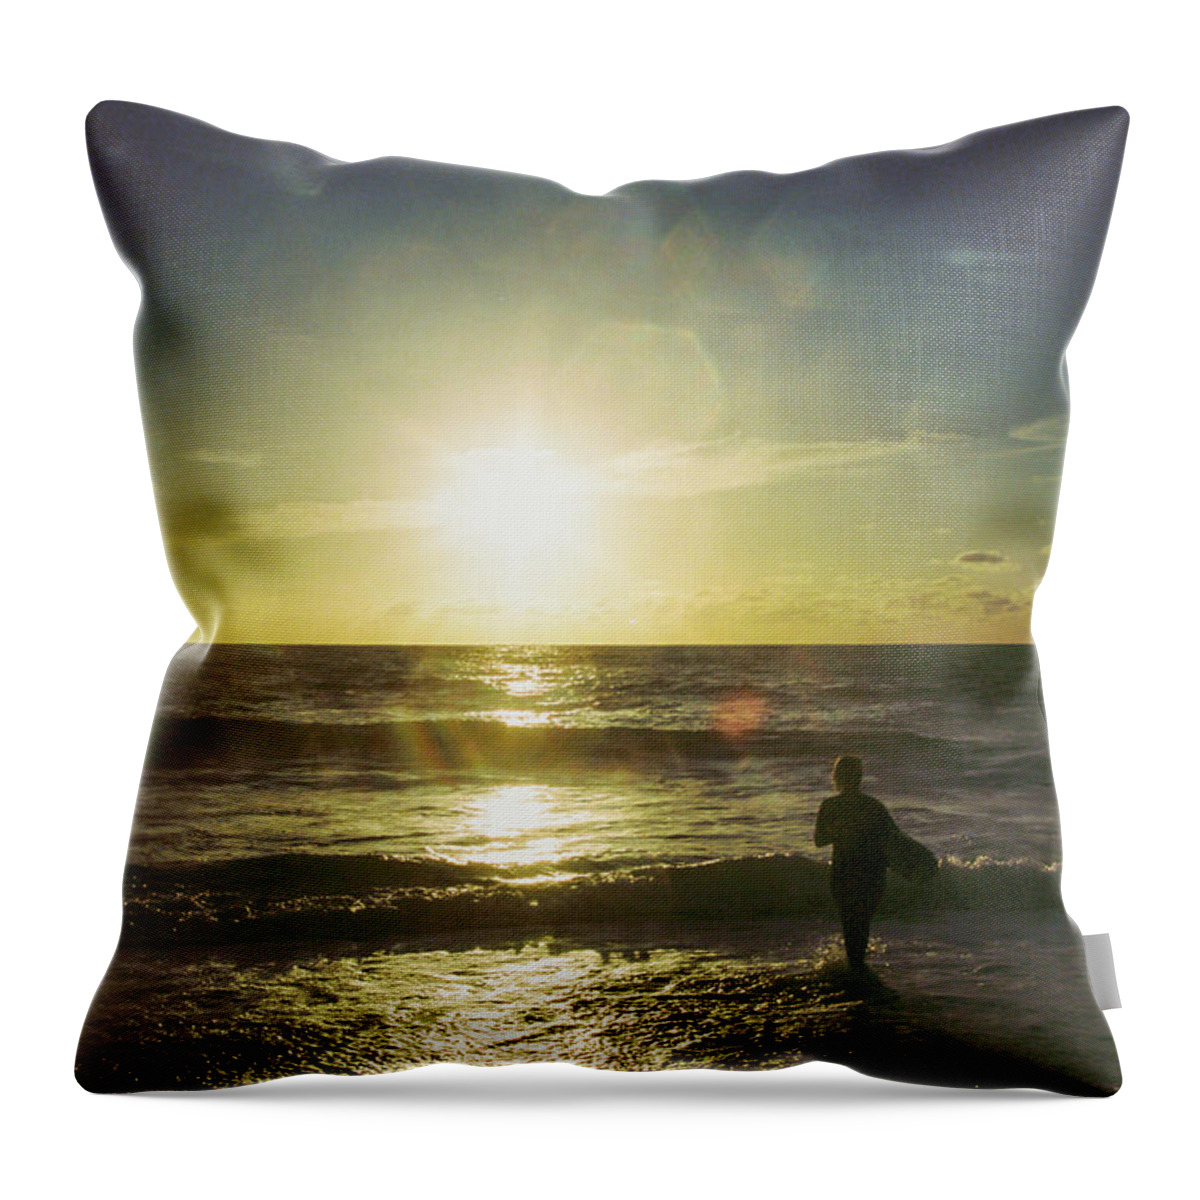 Play Throw Pillow featuring the photograph Watching sunset by Barthelemy de Mazenod